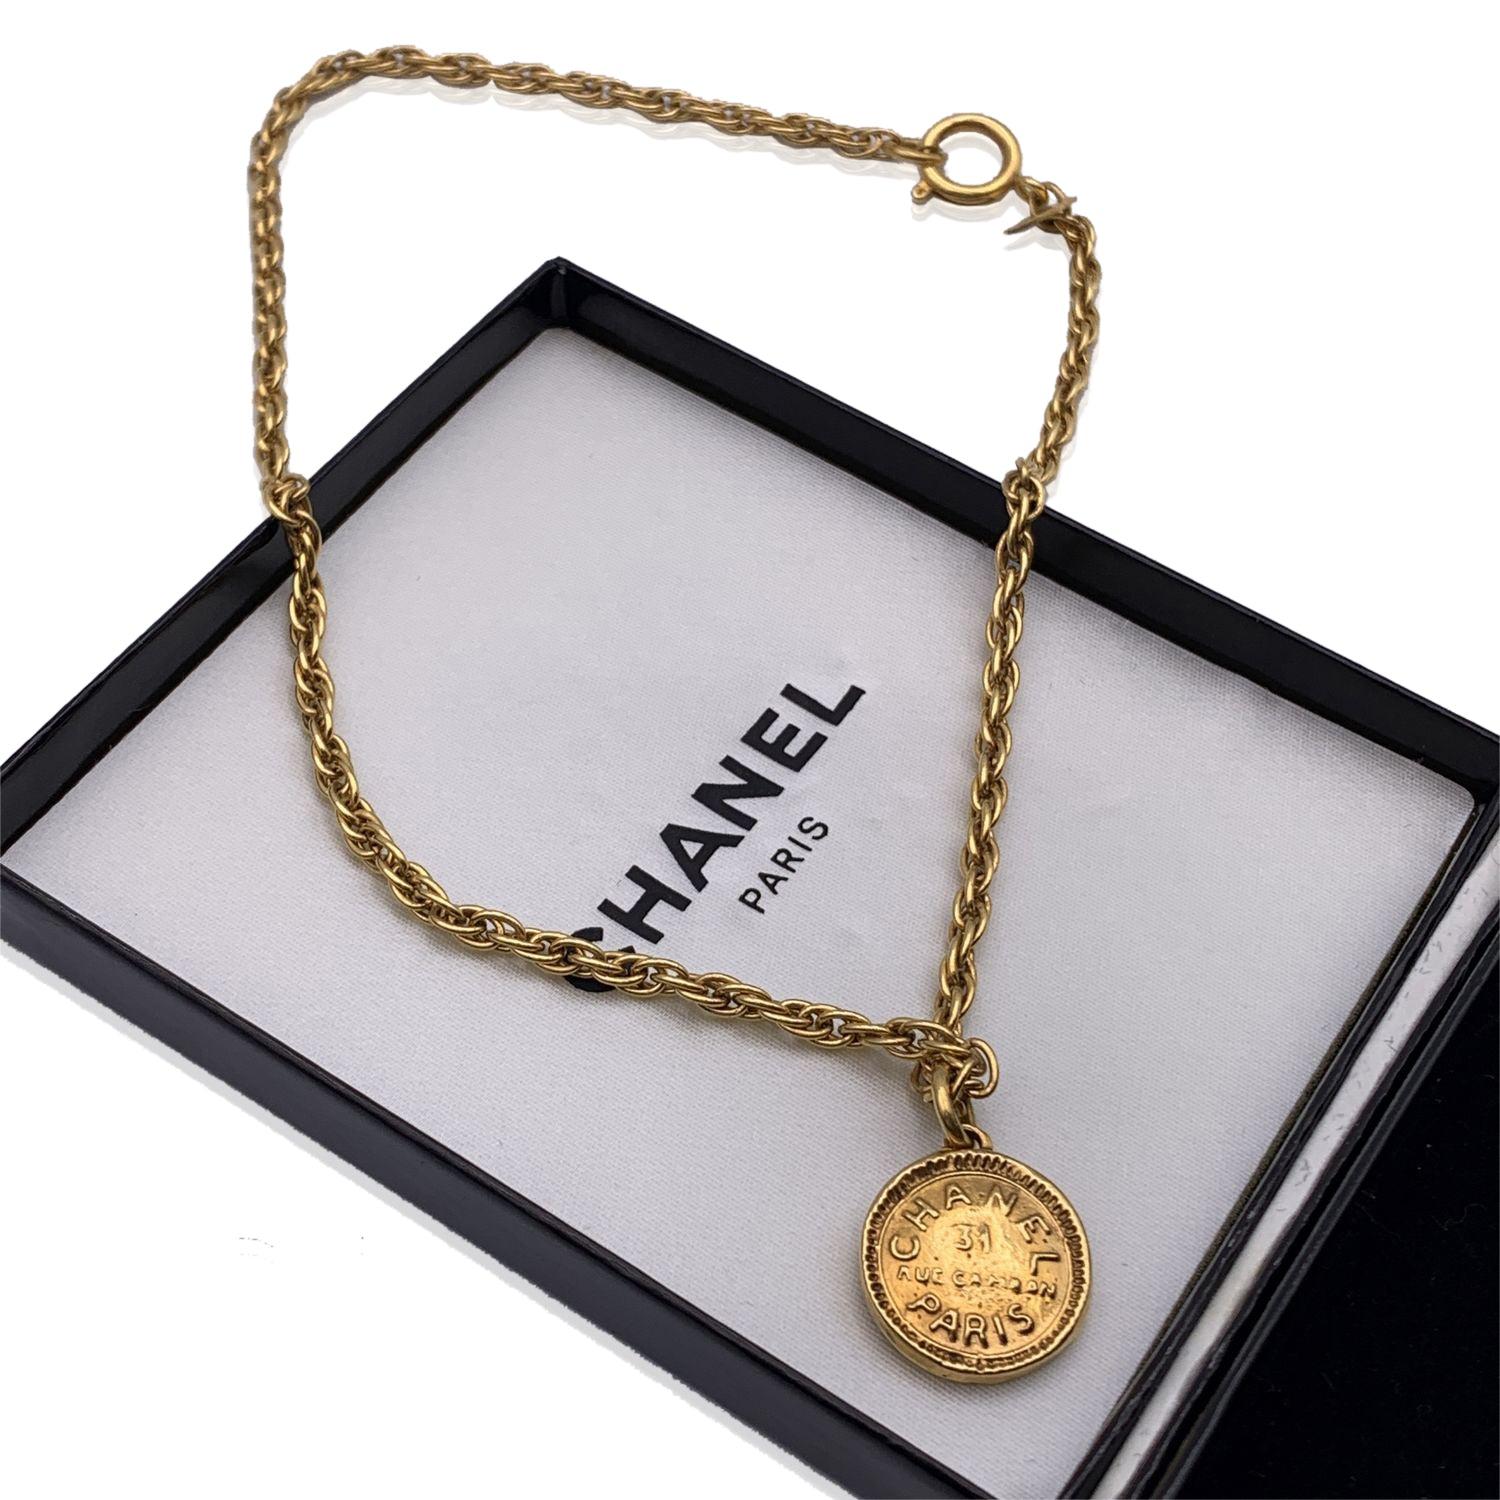 Vintage gold metal chain necklace and round 'Chanel 31 Rue Cambon Paris' medallion pendant. Spring ring closure. Necklace's length 16 inches - 40.6 cm. 'CHANEL - CC - Made in France' oval tab on the pendant Condition Rating: A - EXCELLENTCondition